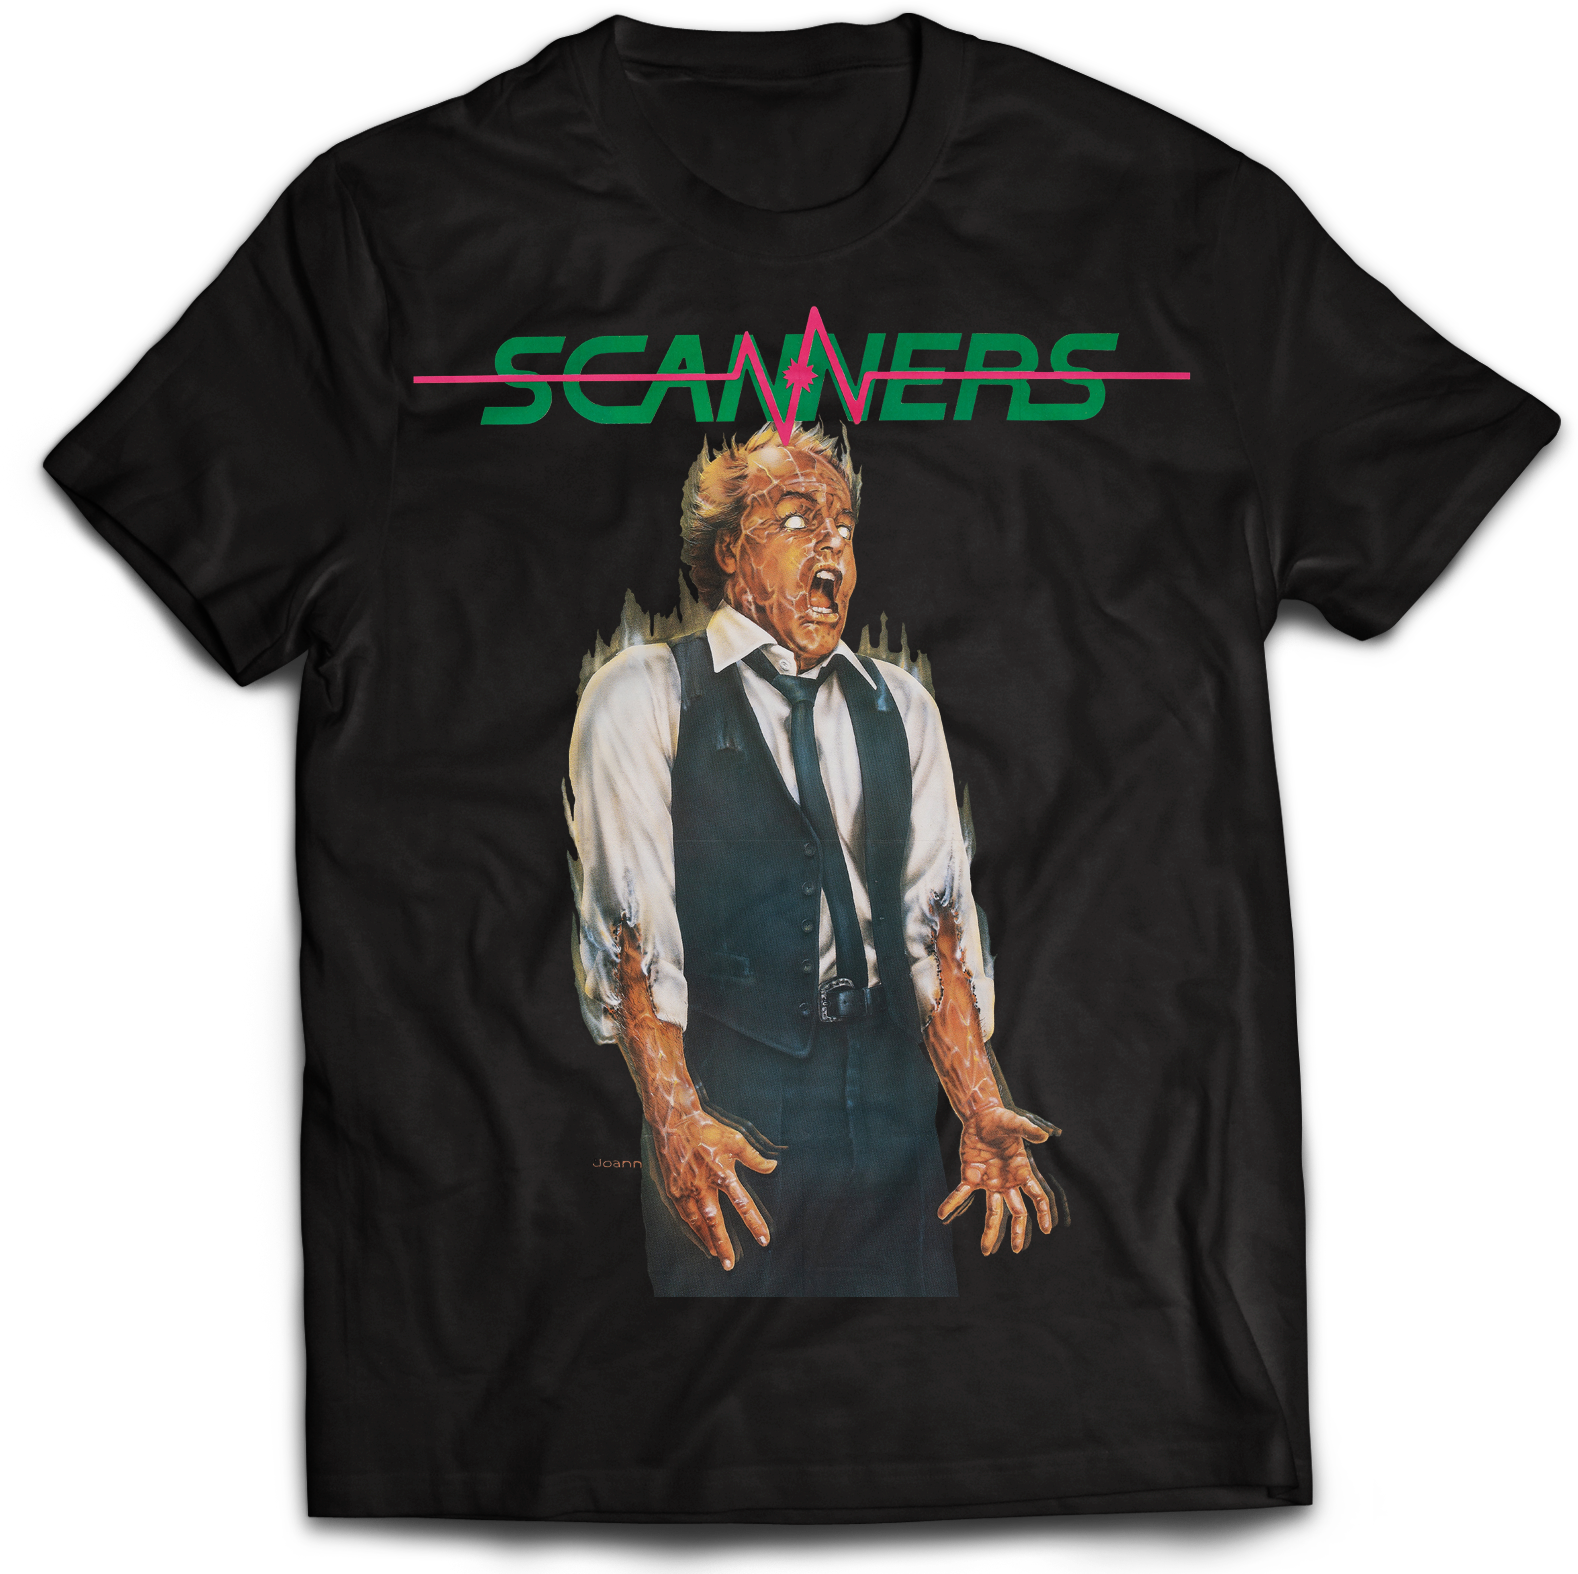 SCANNERS "FRENCH POSTER" T-SHIRT